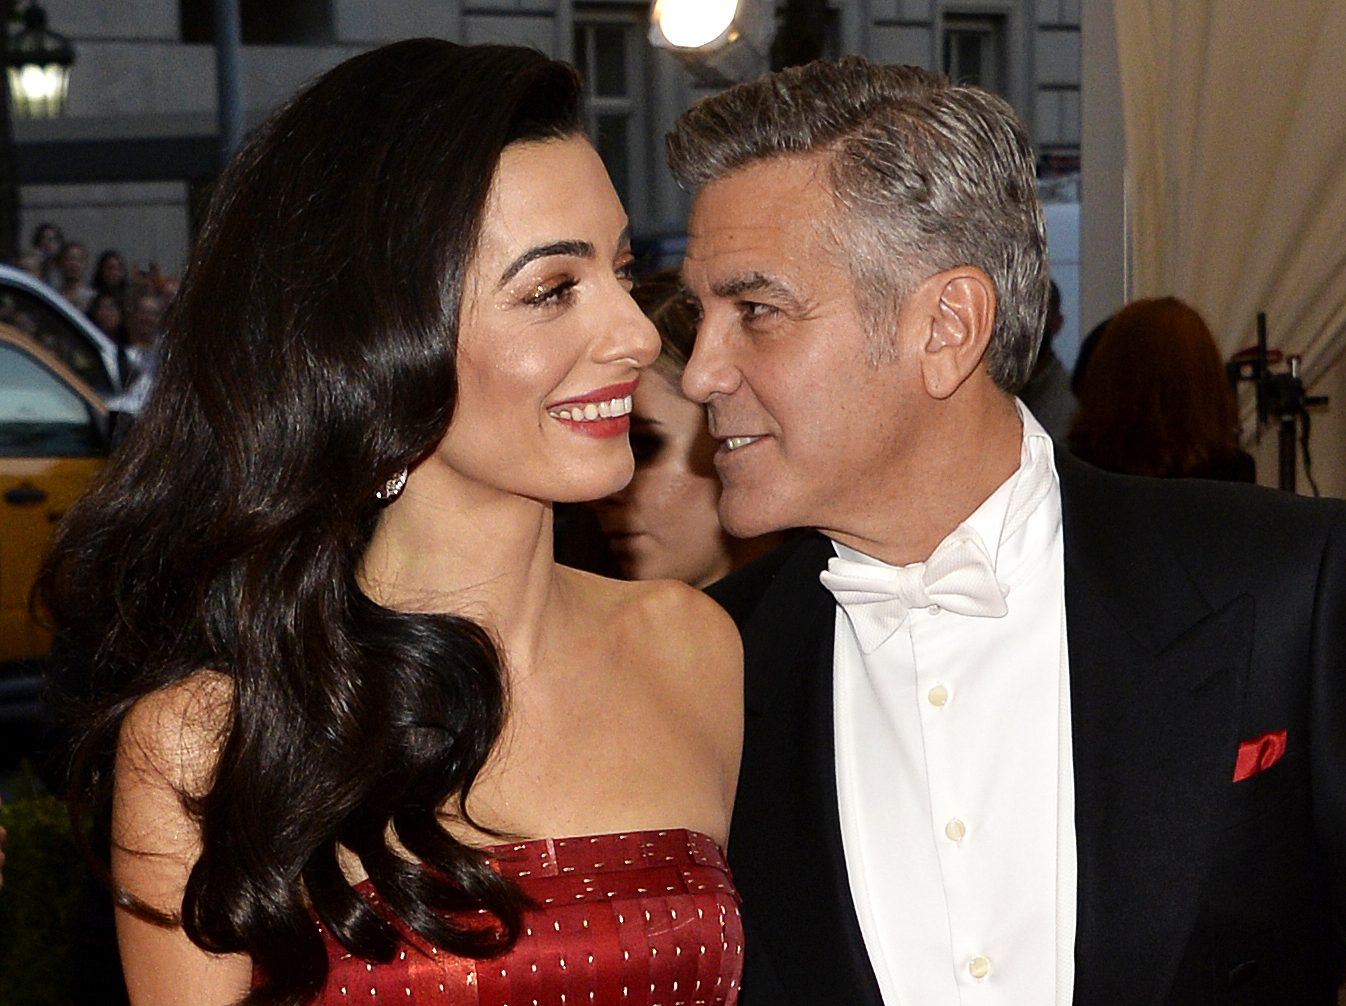 George Clooney shares how he proposed to Amal Clooney